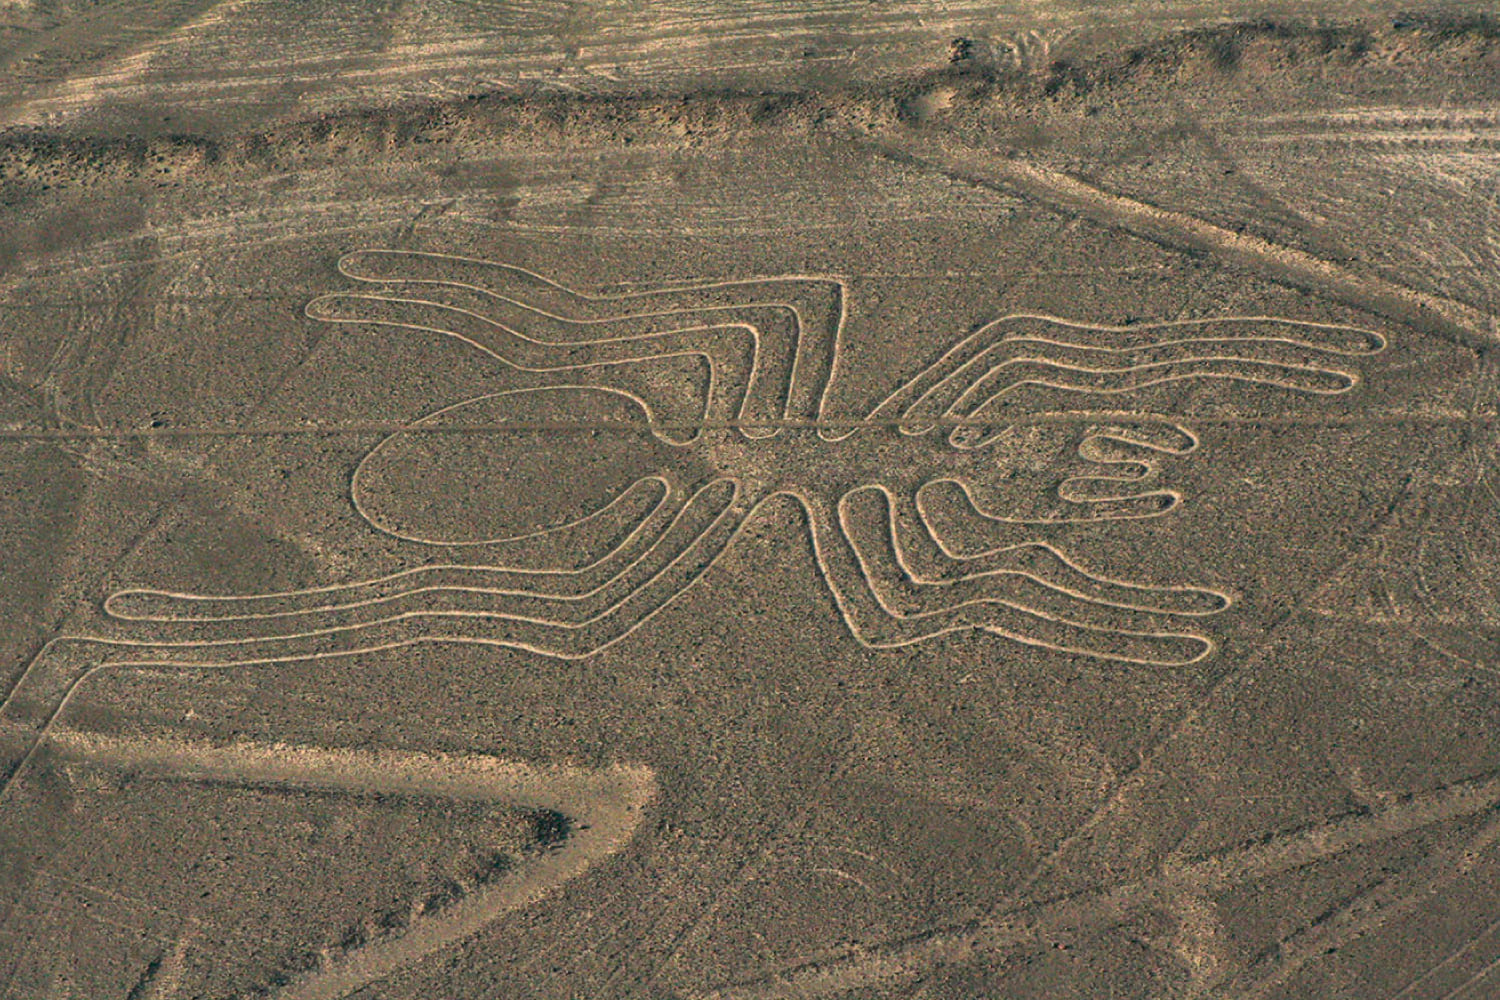 HISTORY OF THE DISCOVERY OF THE NAZCA LINES